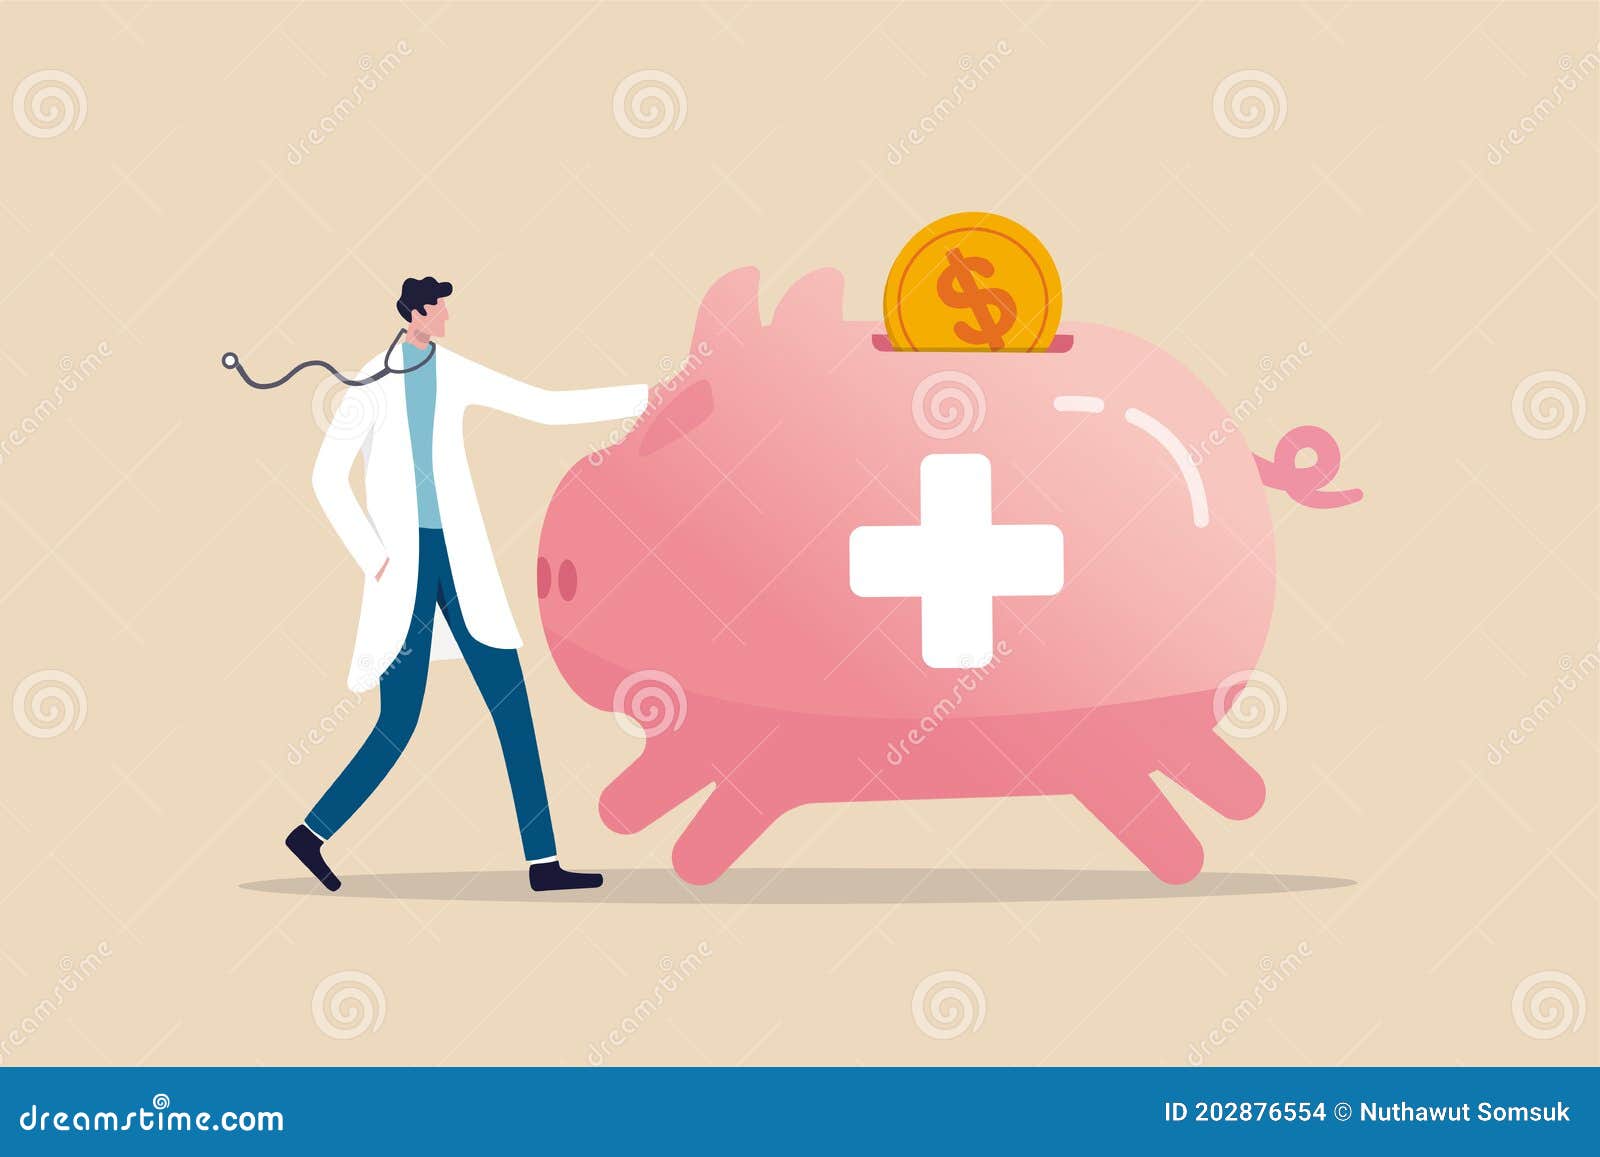 health saving account, hsa, financial plan saving for medical expense or medicare cost and benefits concept, doctor with